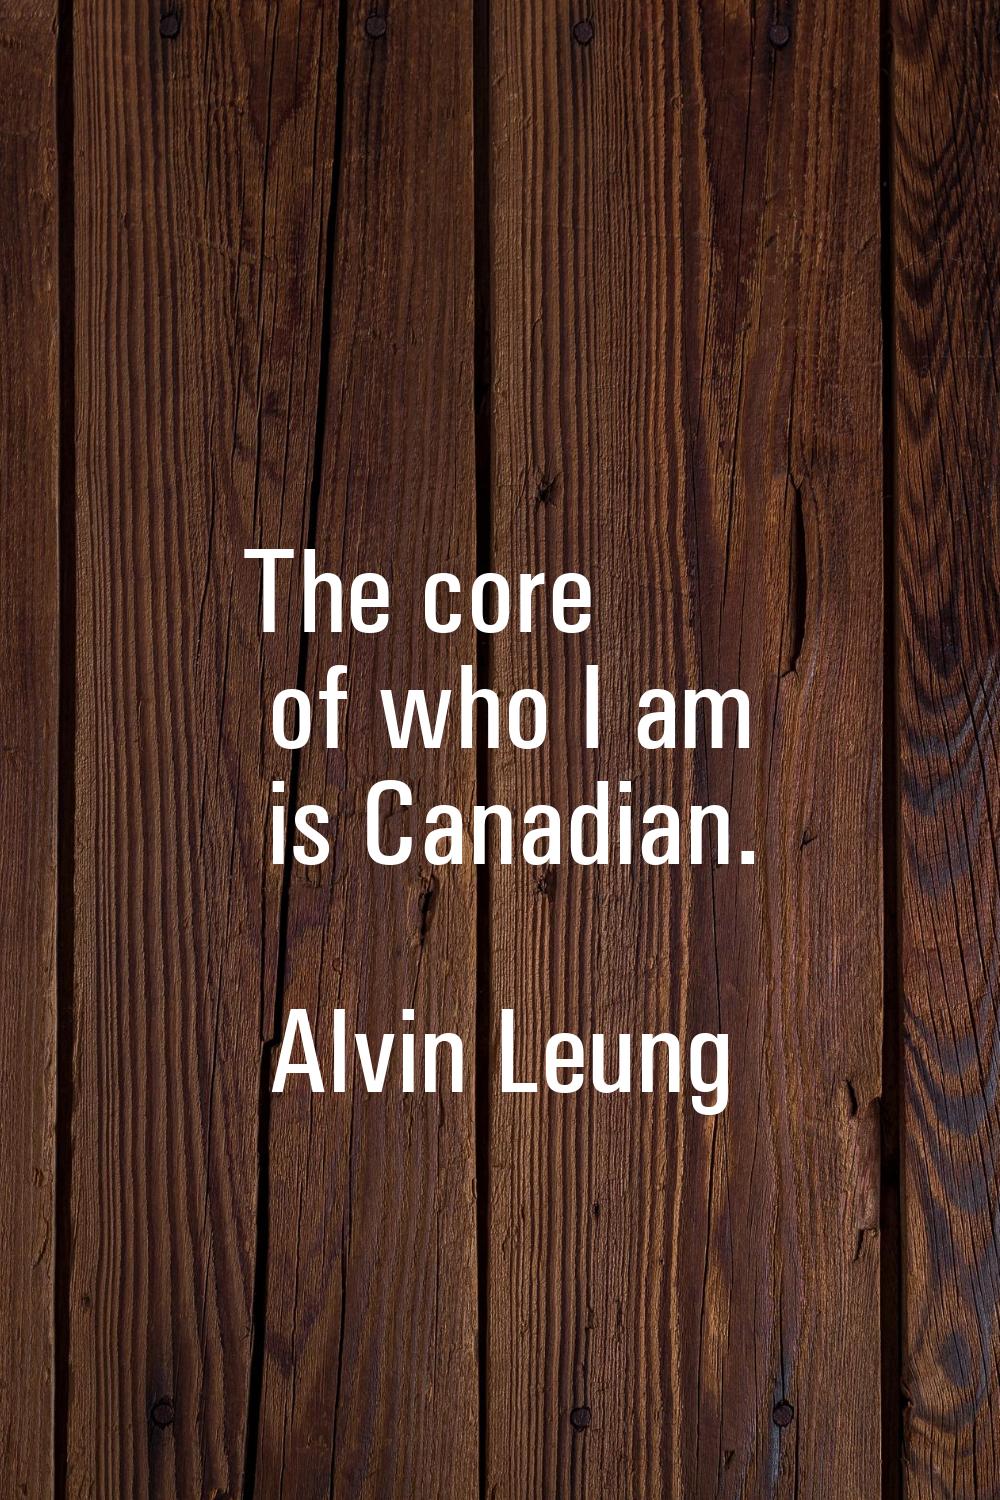 The core of who I am is Canadian.